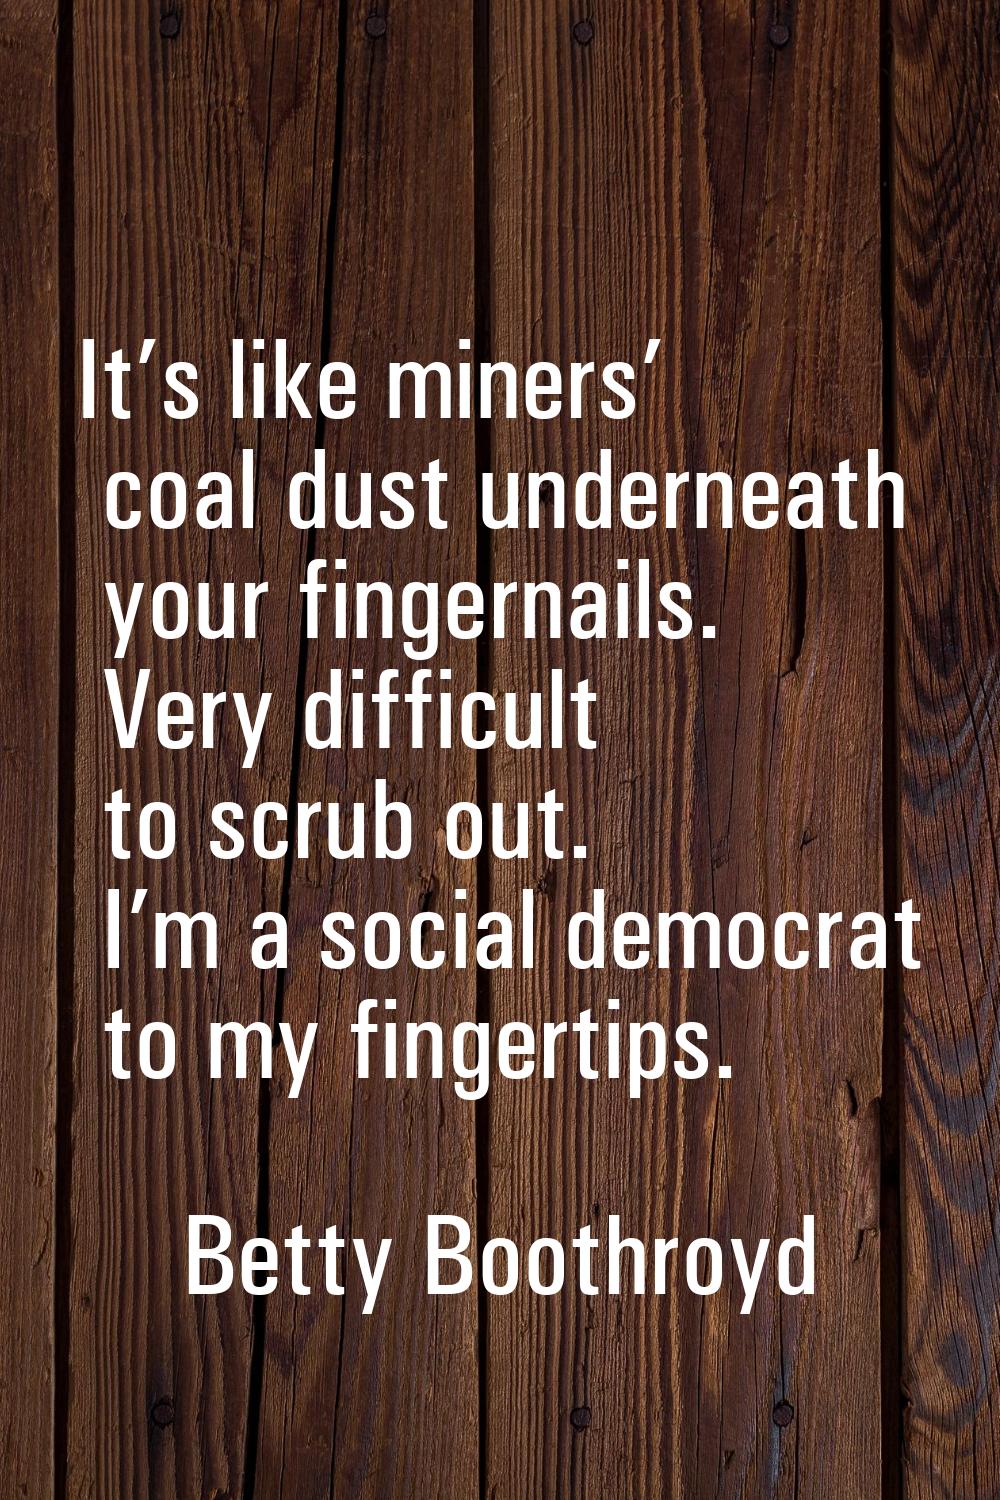 It’s like miners’ coal dust underneath your fingernails. Very difficult to scrub out. I’m a social 